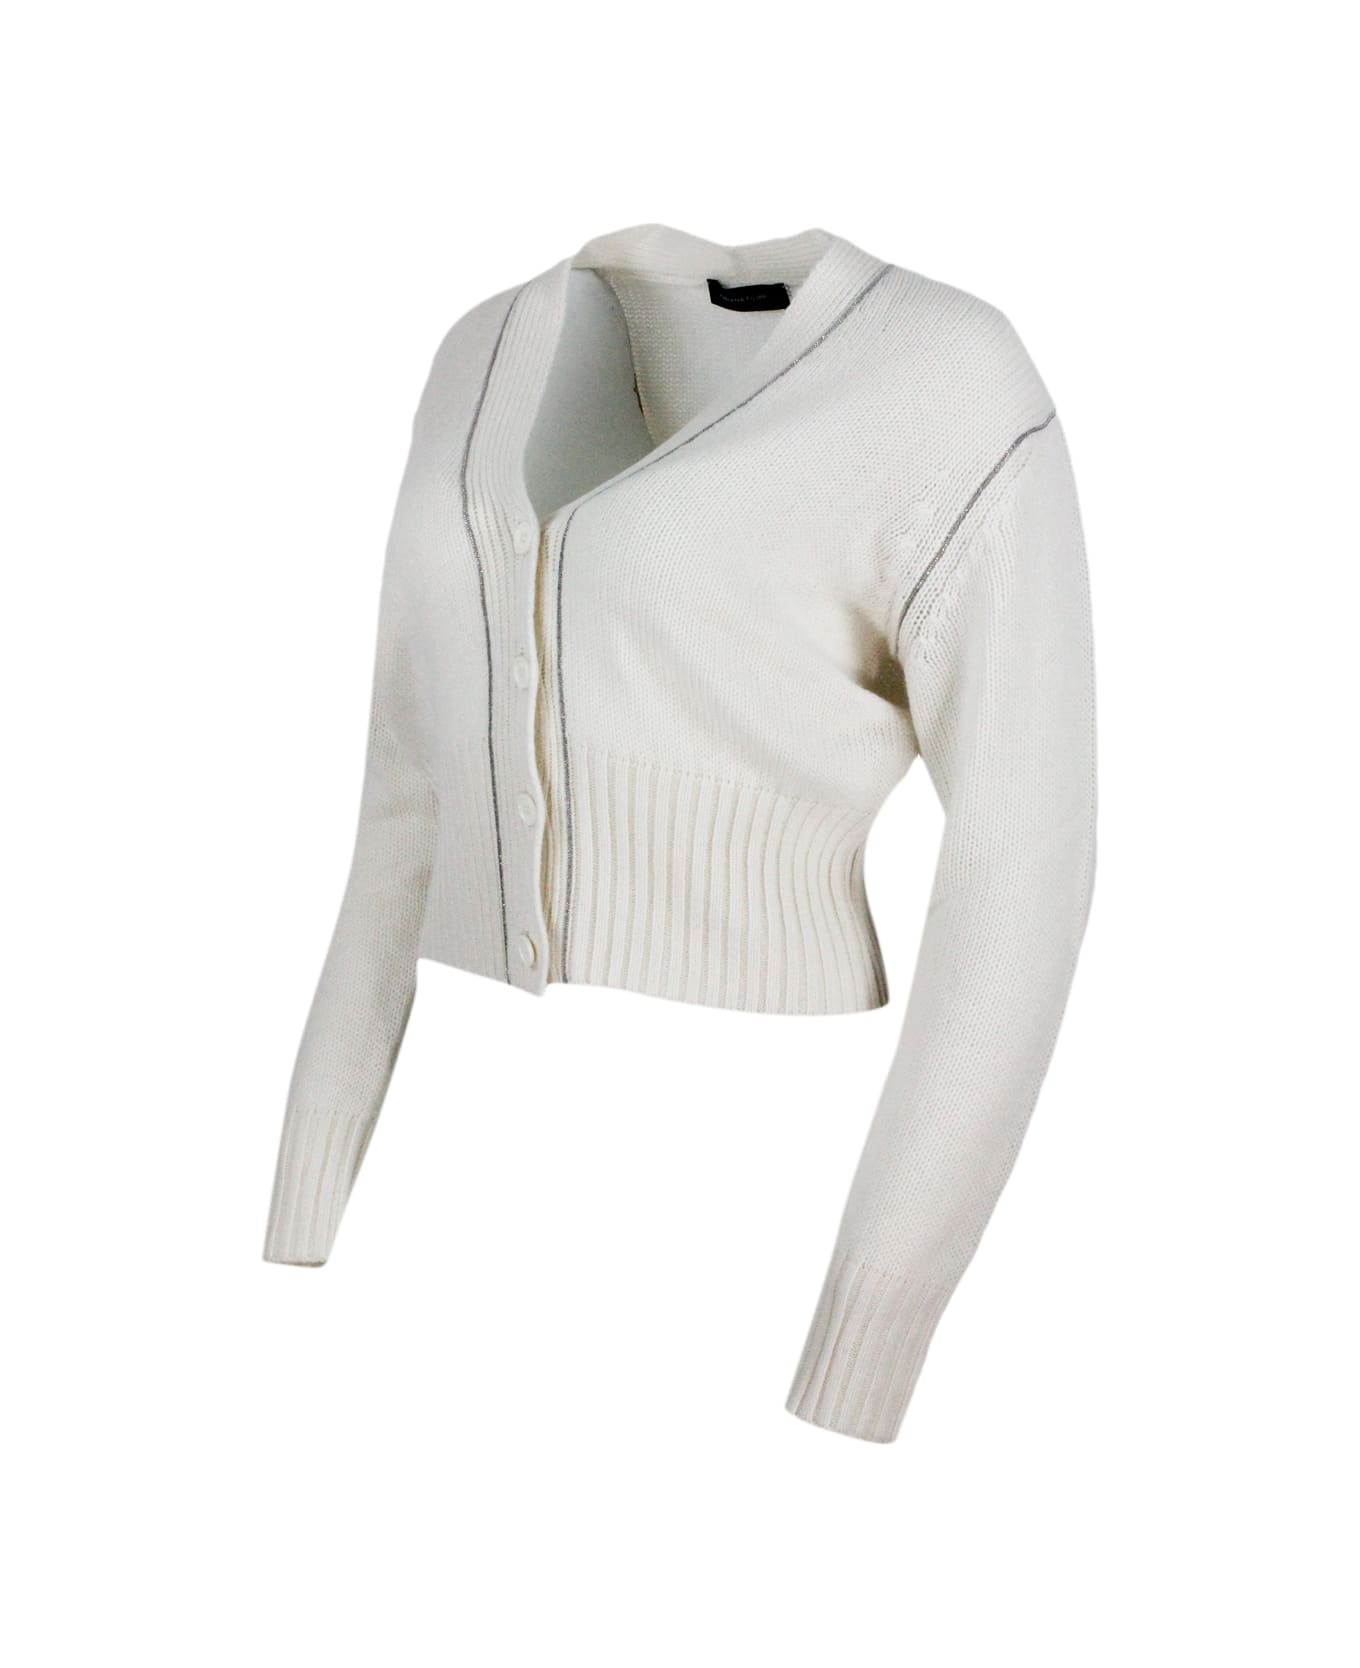 Fabiana Filippi Long-sleeved Cashmere Cardigan Sweater With Button Closure And Embellished With Rows Of Monili On The Front - cream